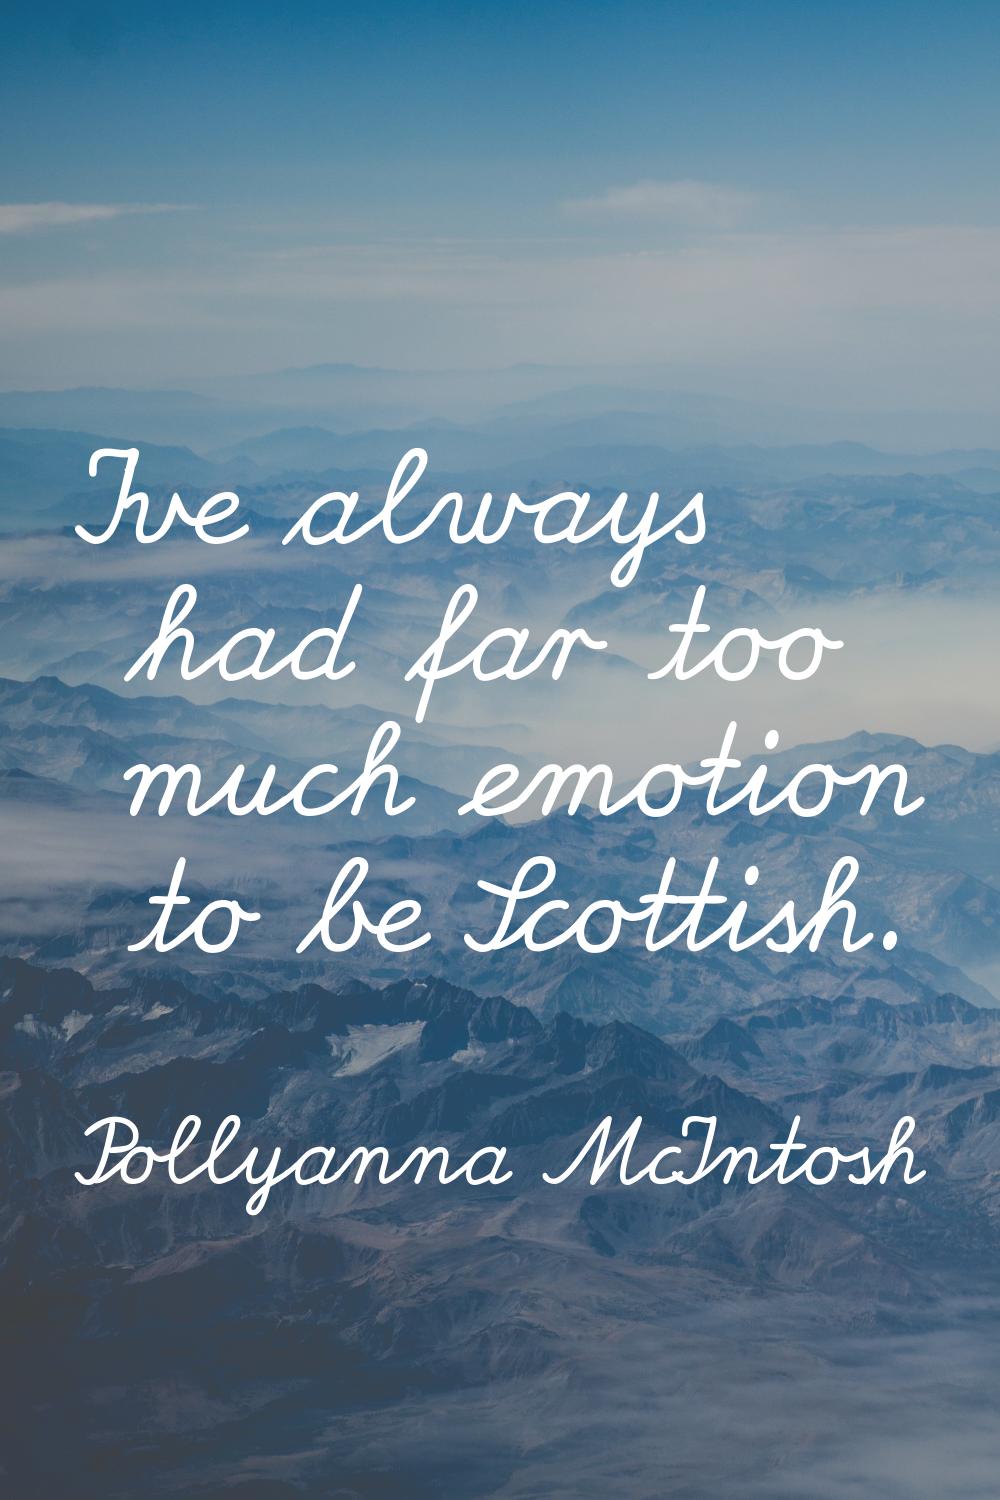 I've always had far too much emotion to be Scottish.